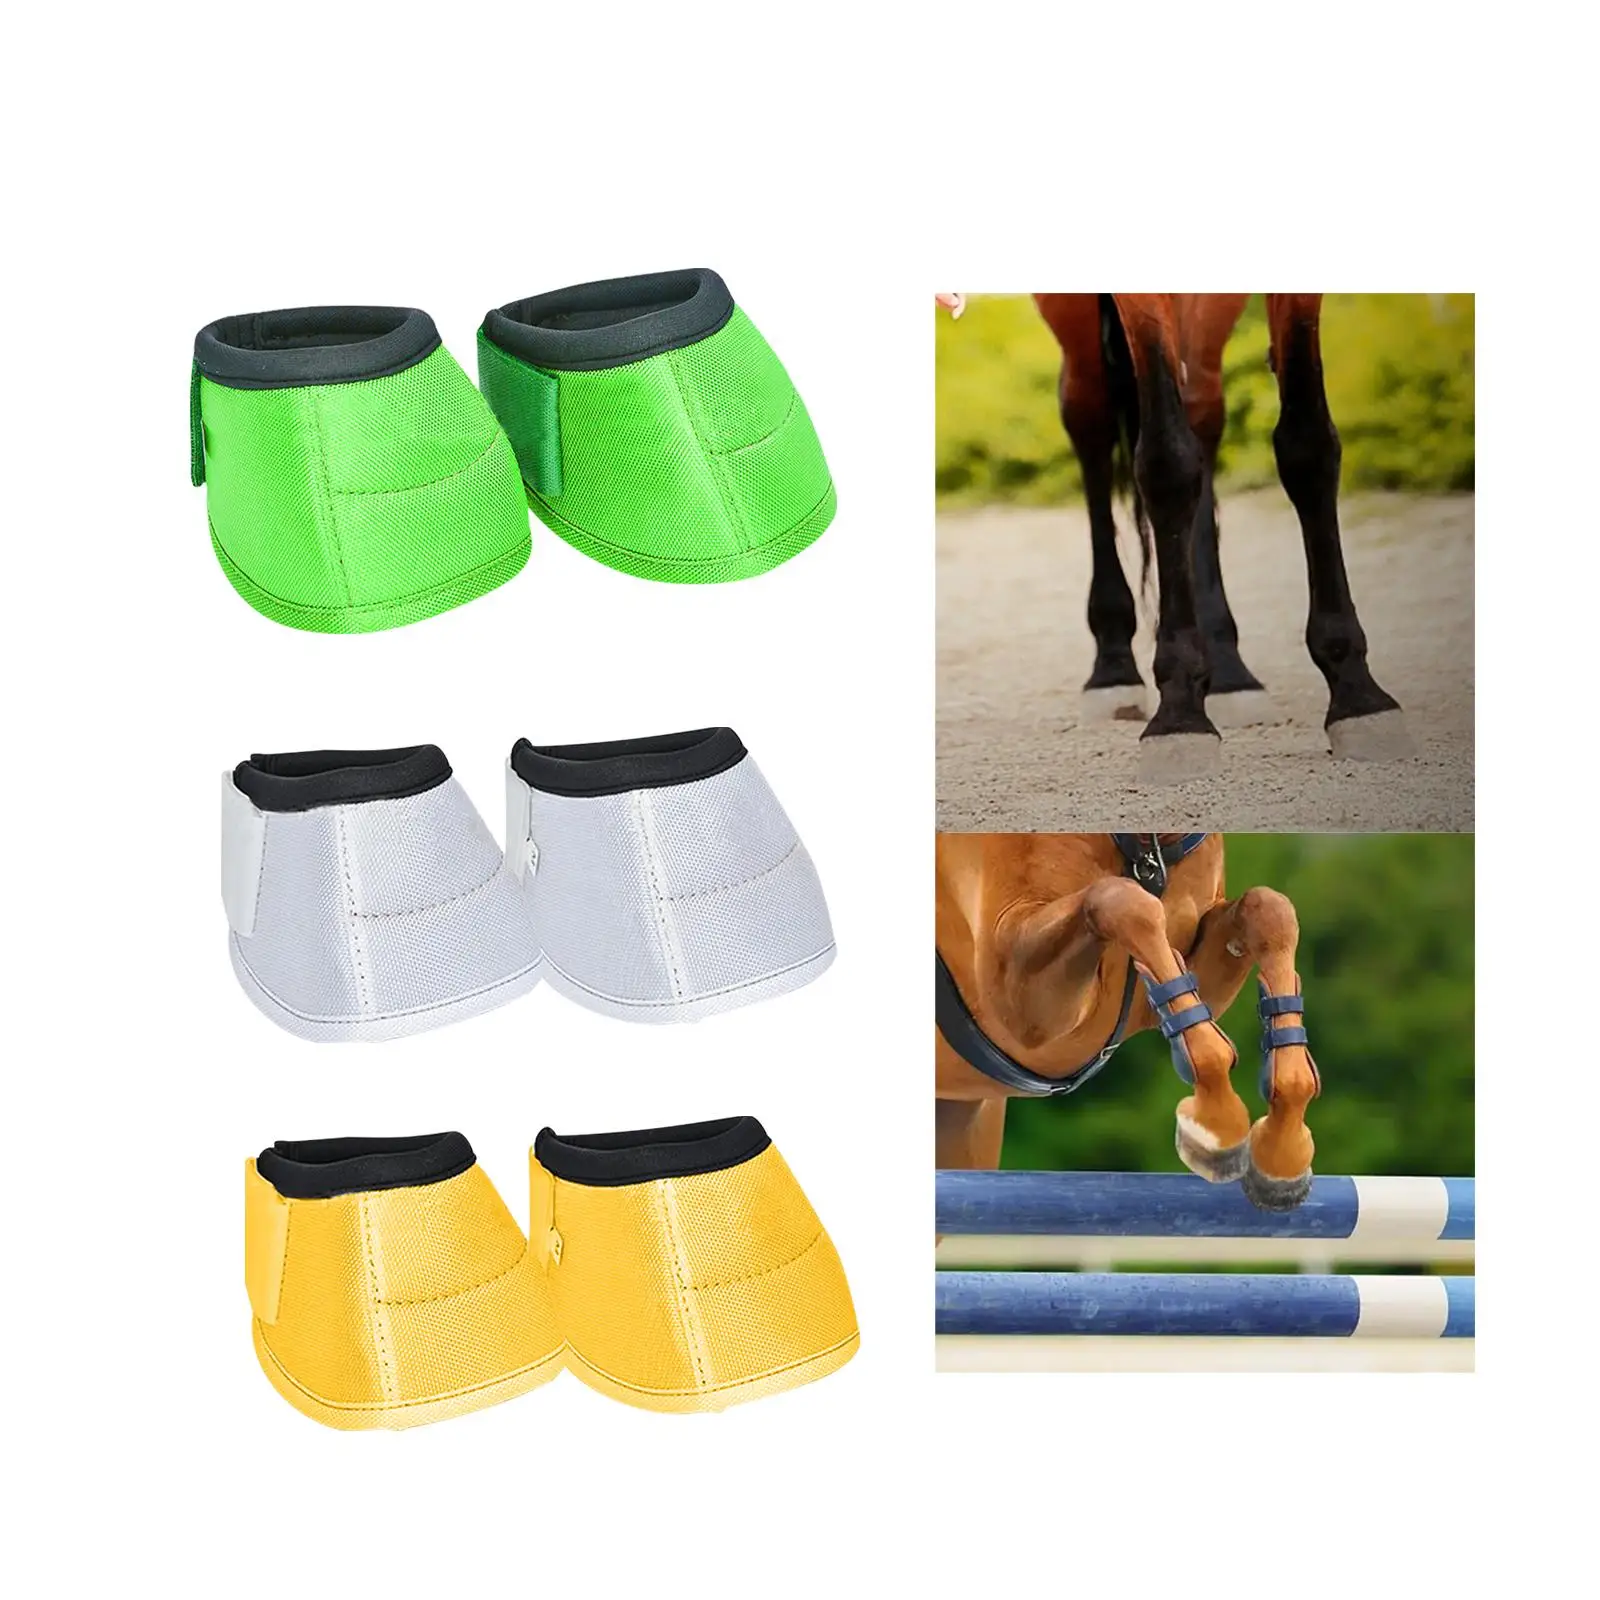 2Pcs Horse Bell Boots Horse Care Boot Flexible and Tough Shock Absorbing Equine Boots Wear Resistant for Riding and Turnout